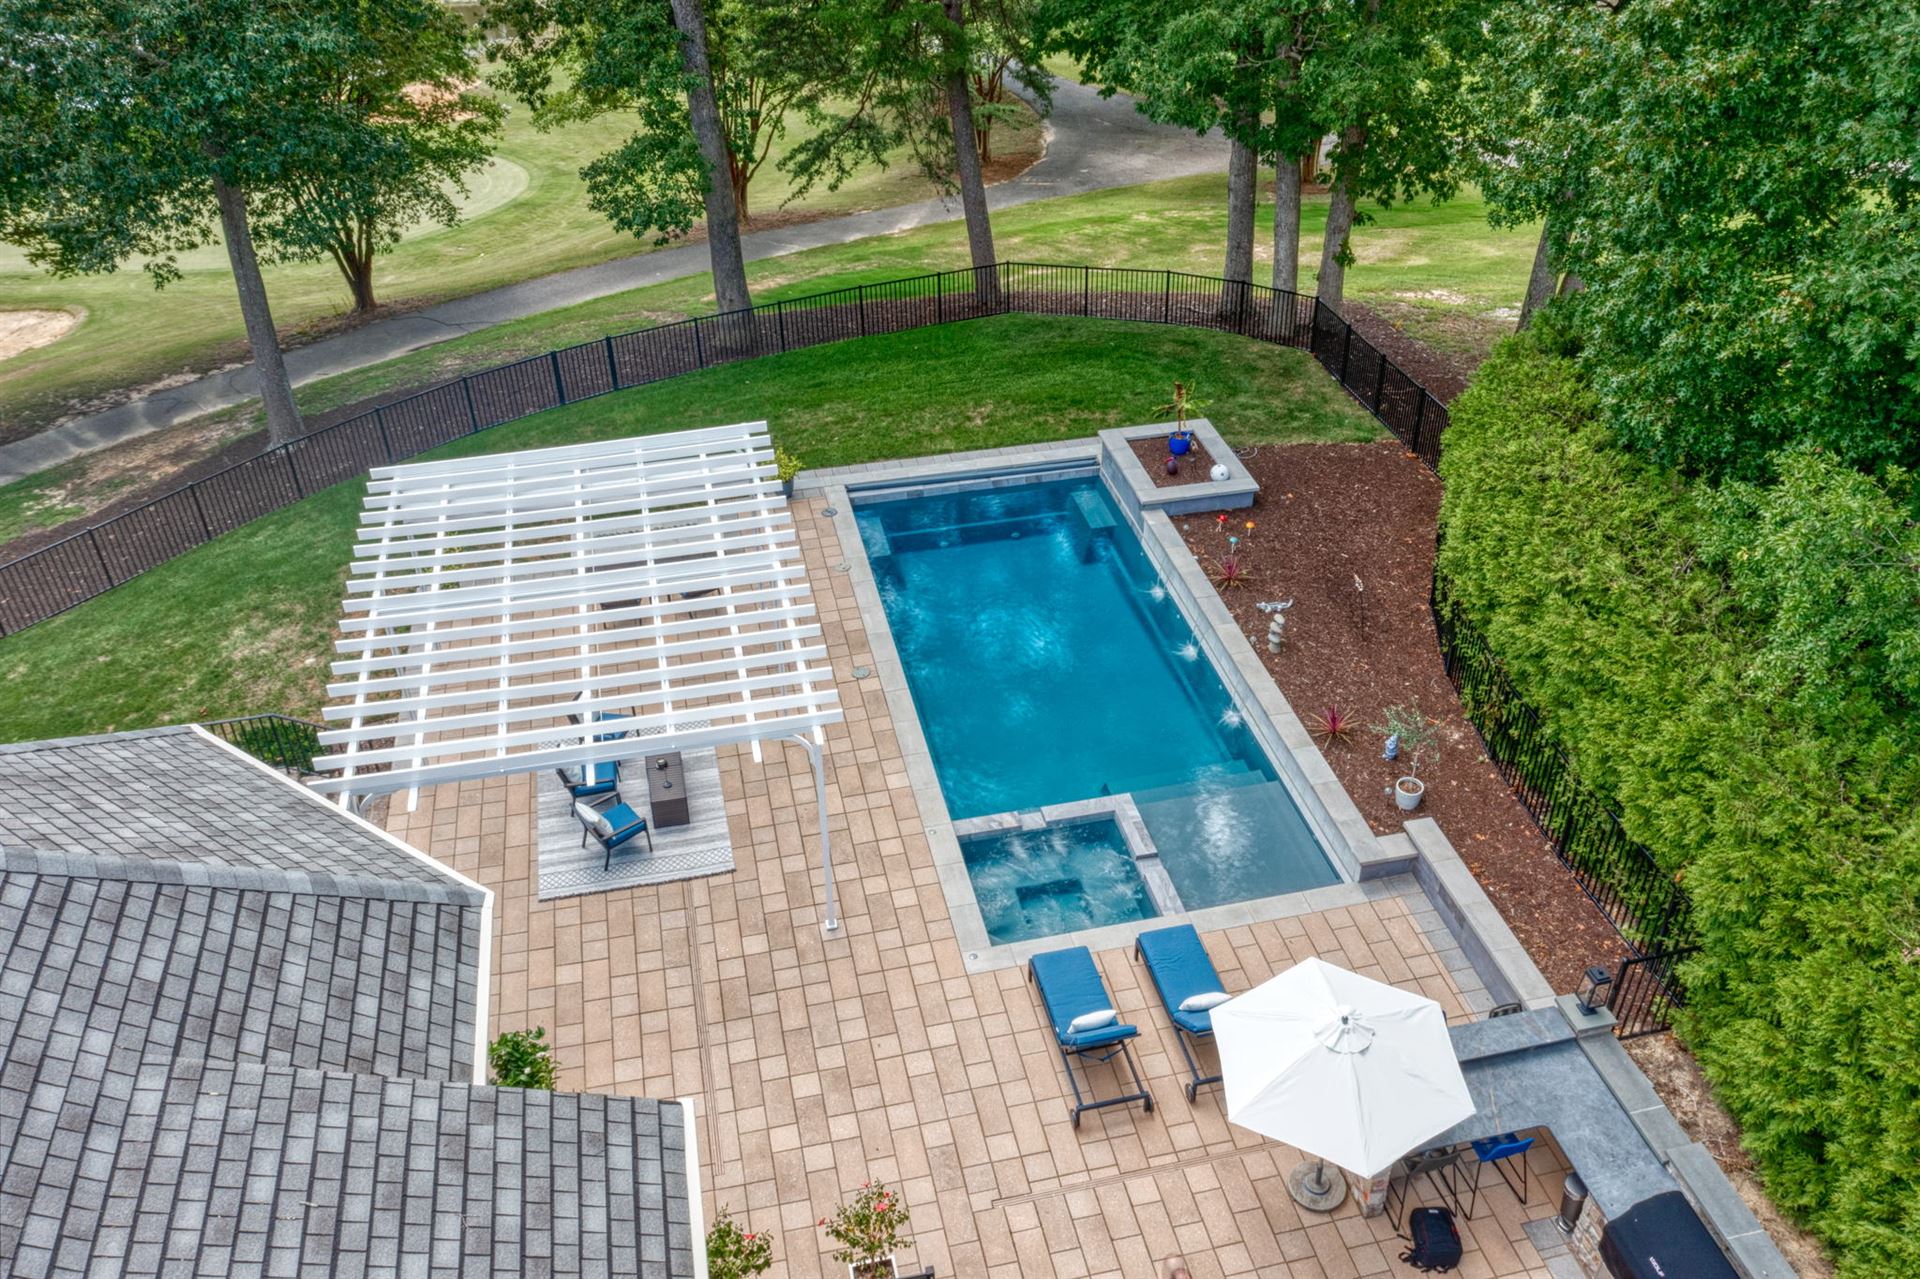 River Pools X36 in Granite Gray with cascade, concrete paver patio, and natural stone coping